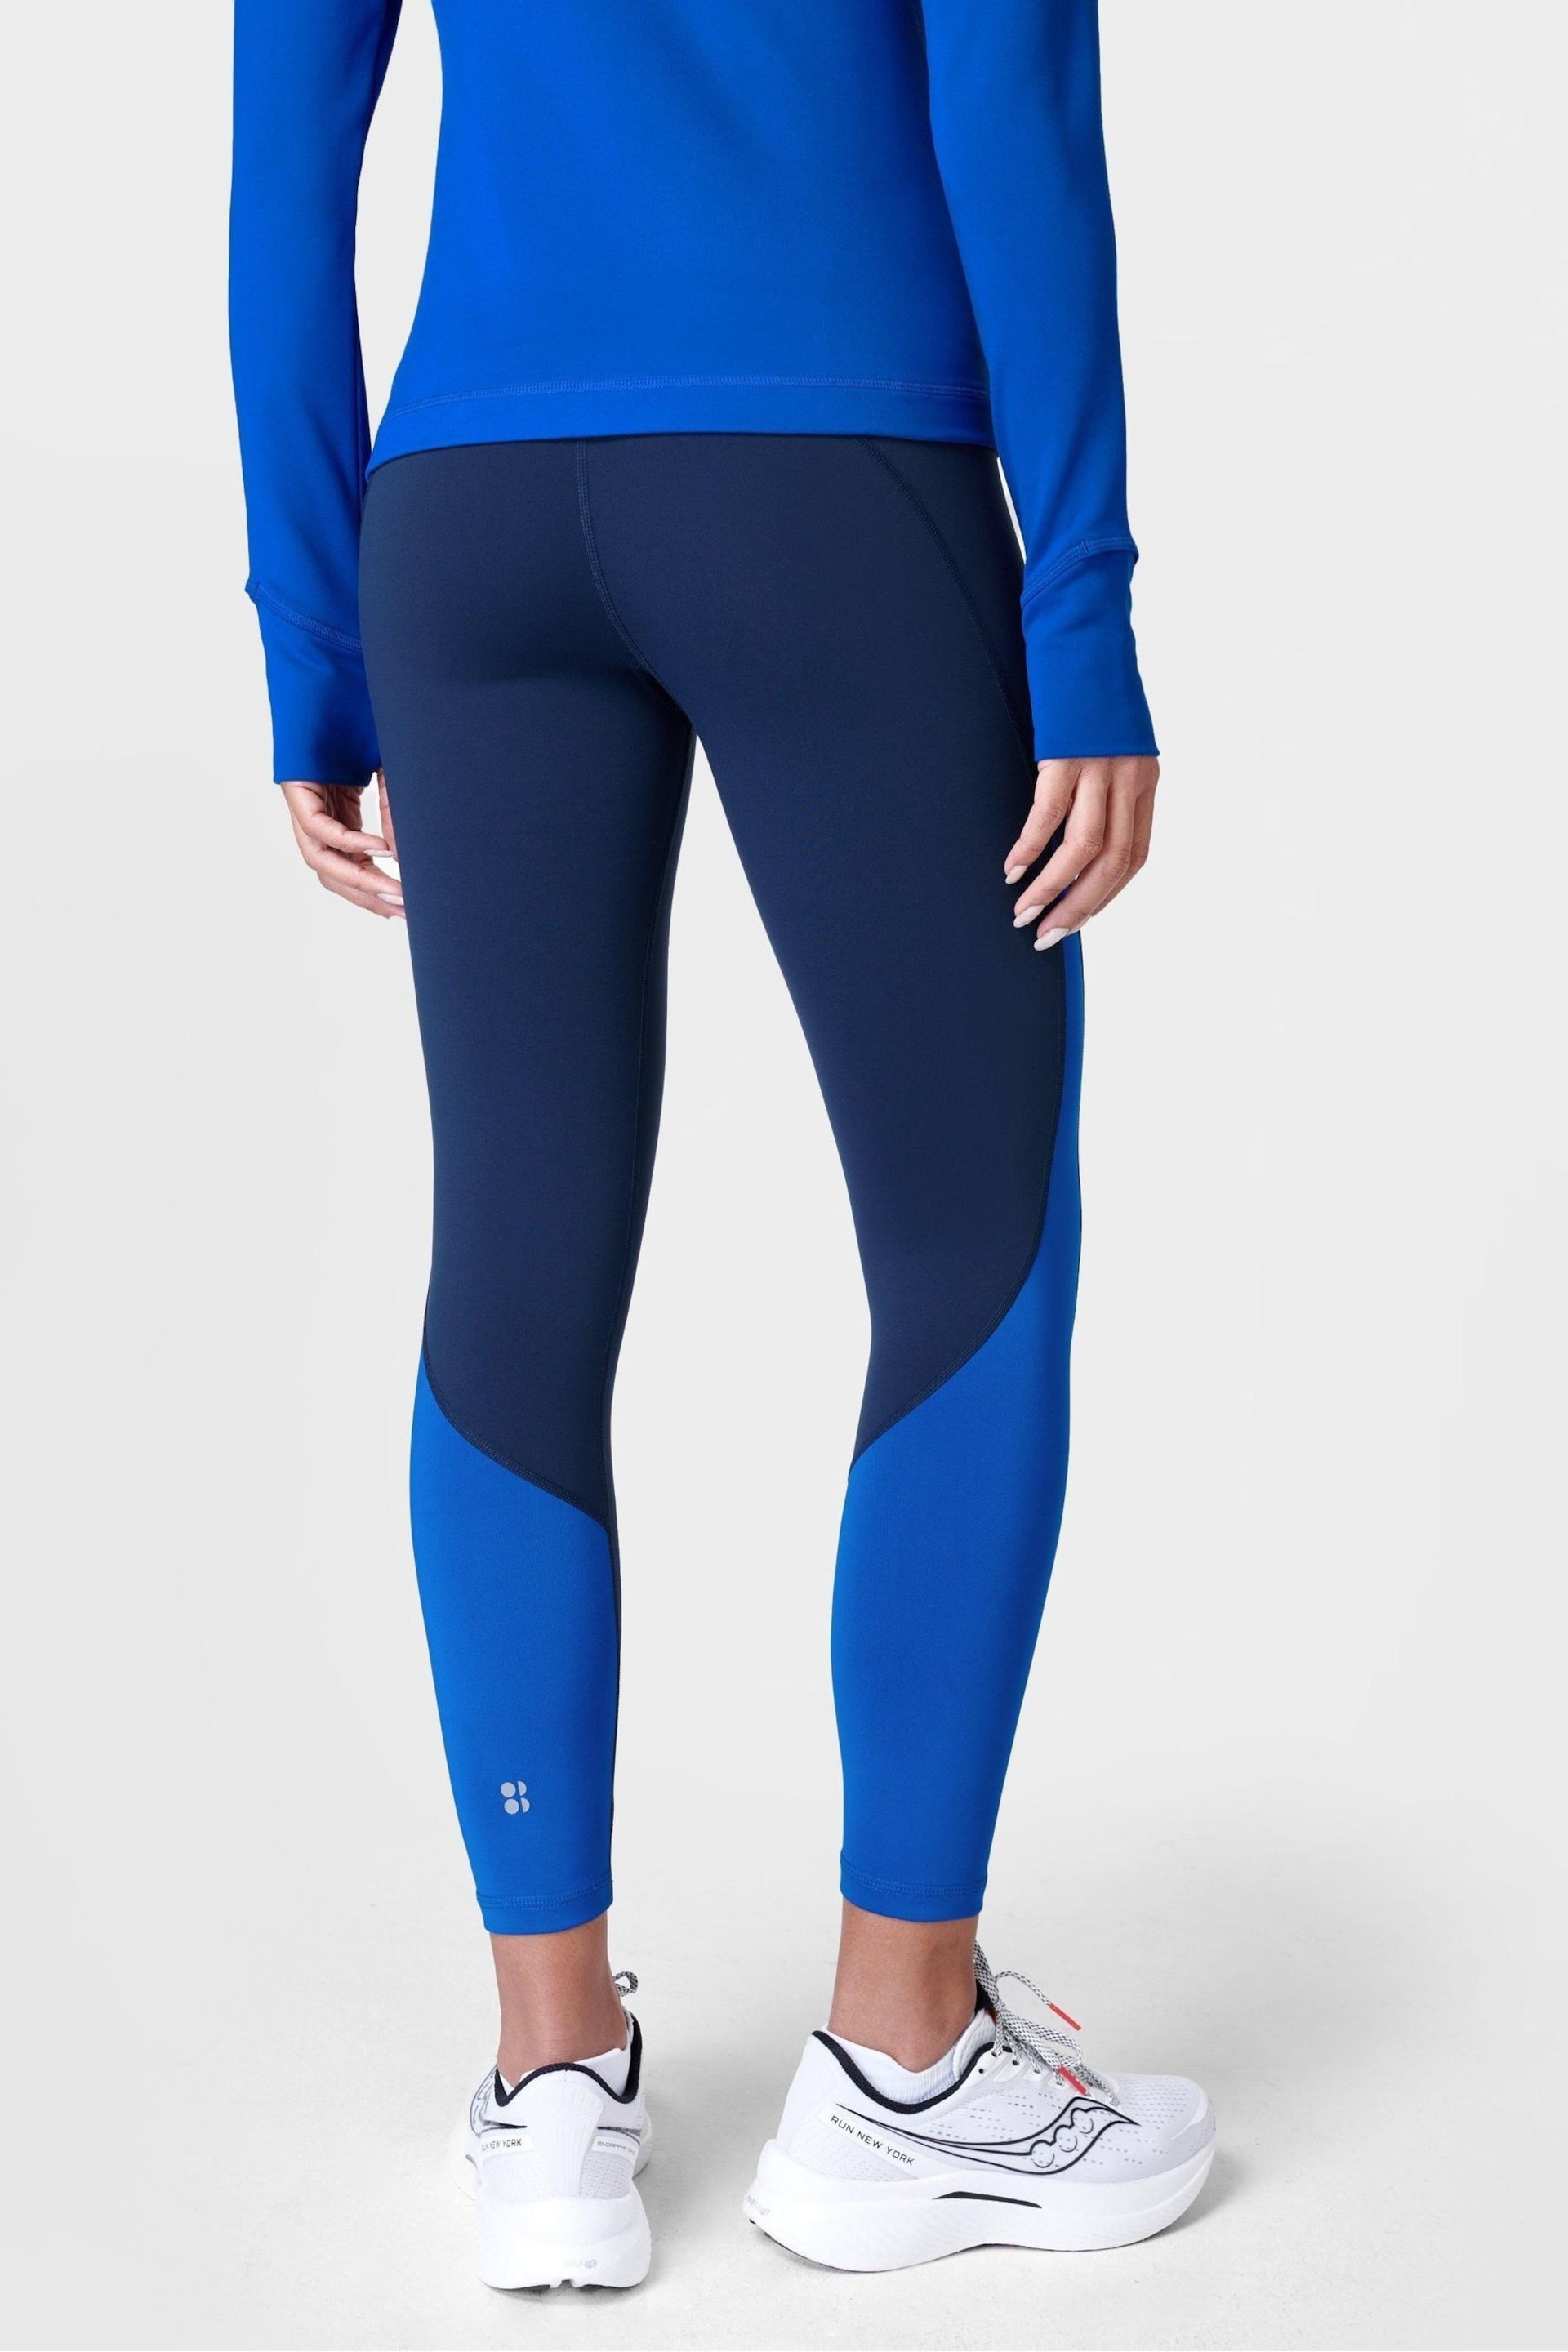 Sweaty Betty Lightning Navy Blue 7/8 Length Power Workout Colour Curve Leggings - Image 2 of 7